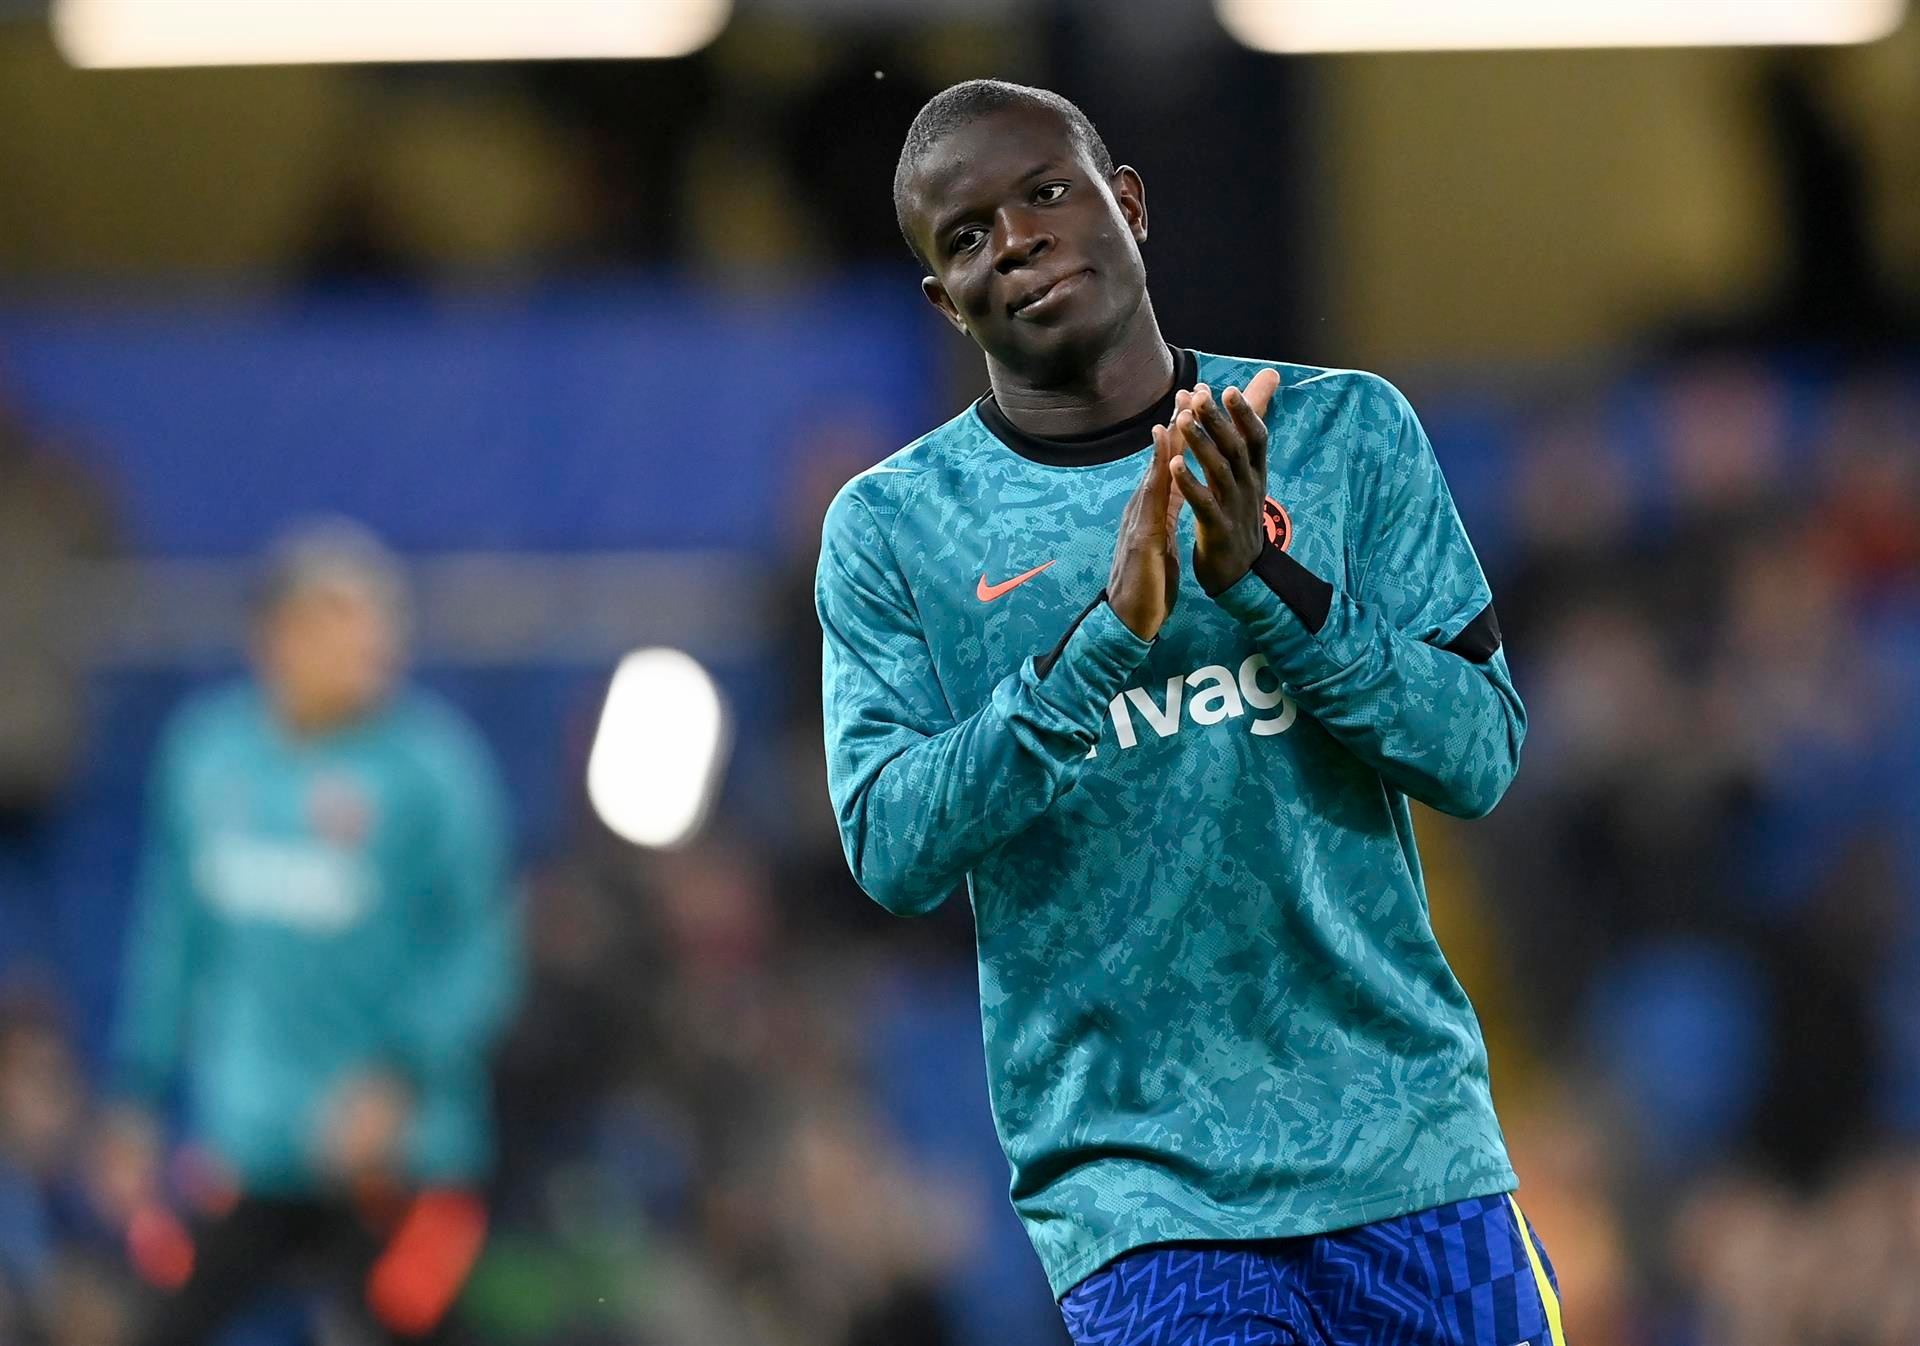 Kante and Mount to be available for Chelsea against Madrid